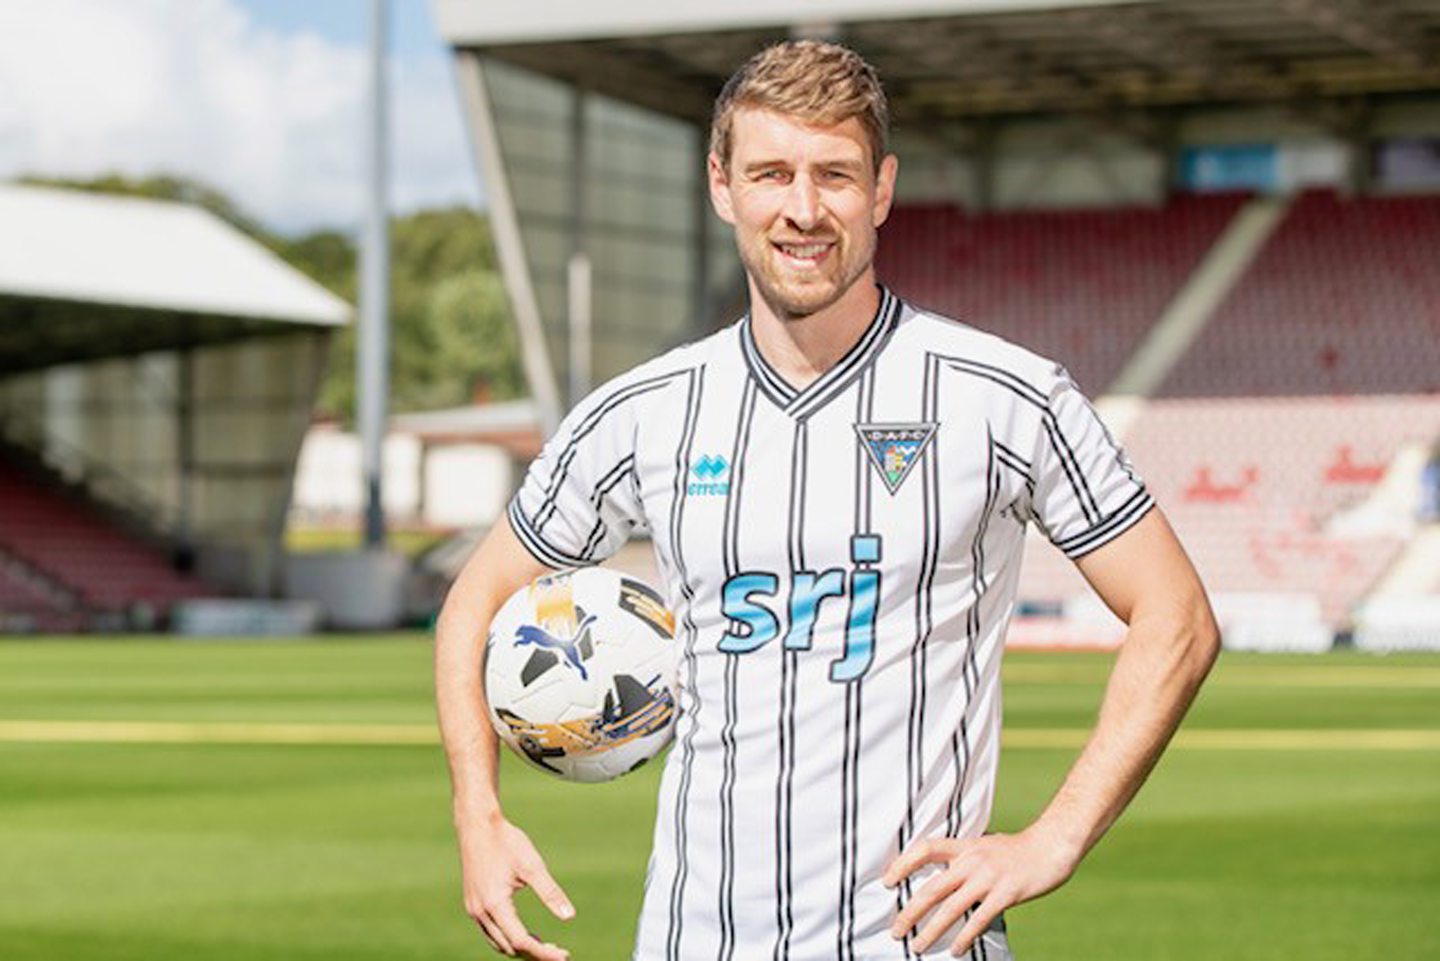 New Dunfermline recruit David Wotherspoon at East End Park. Image: Craig Brown/Dunfermline Athletic FC